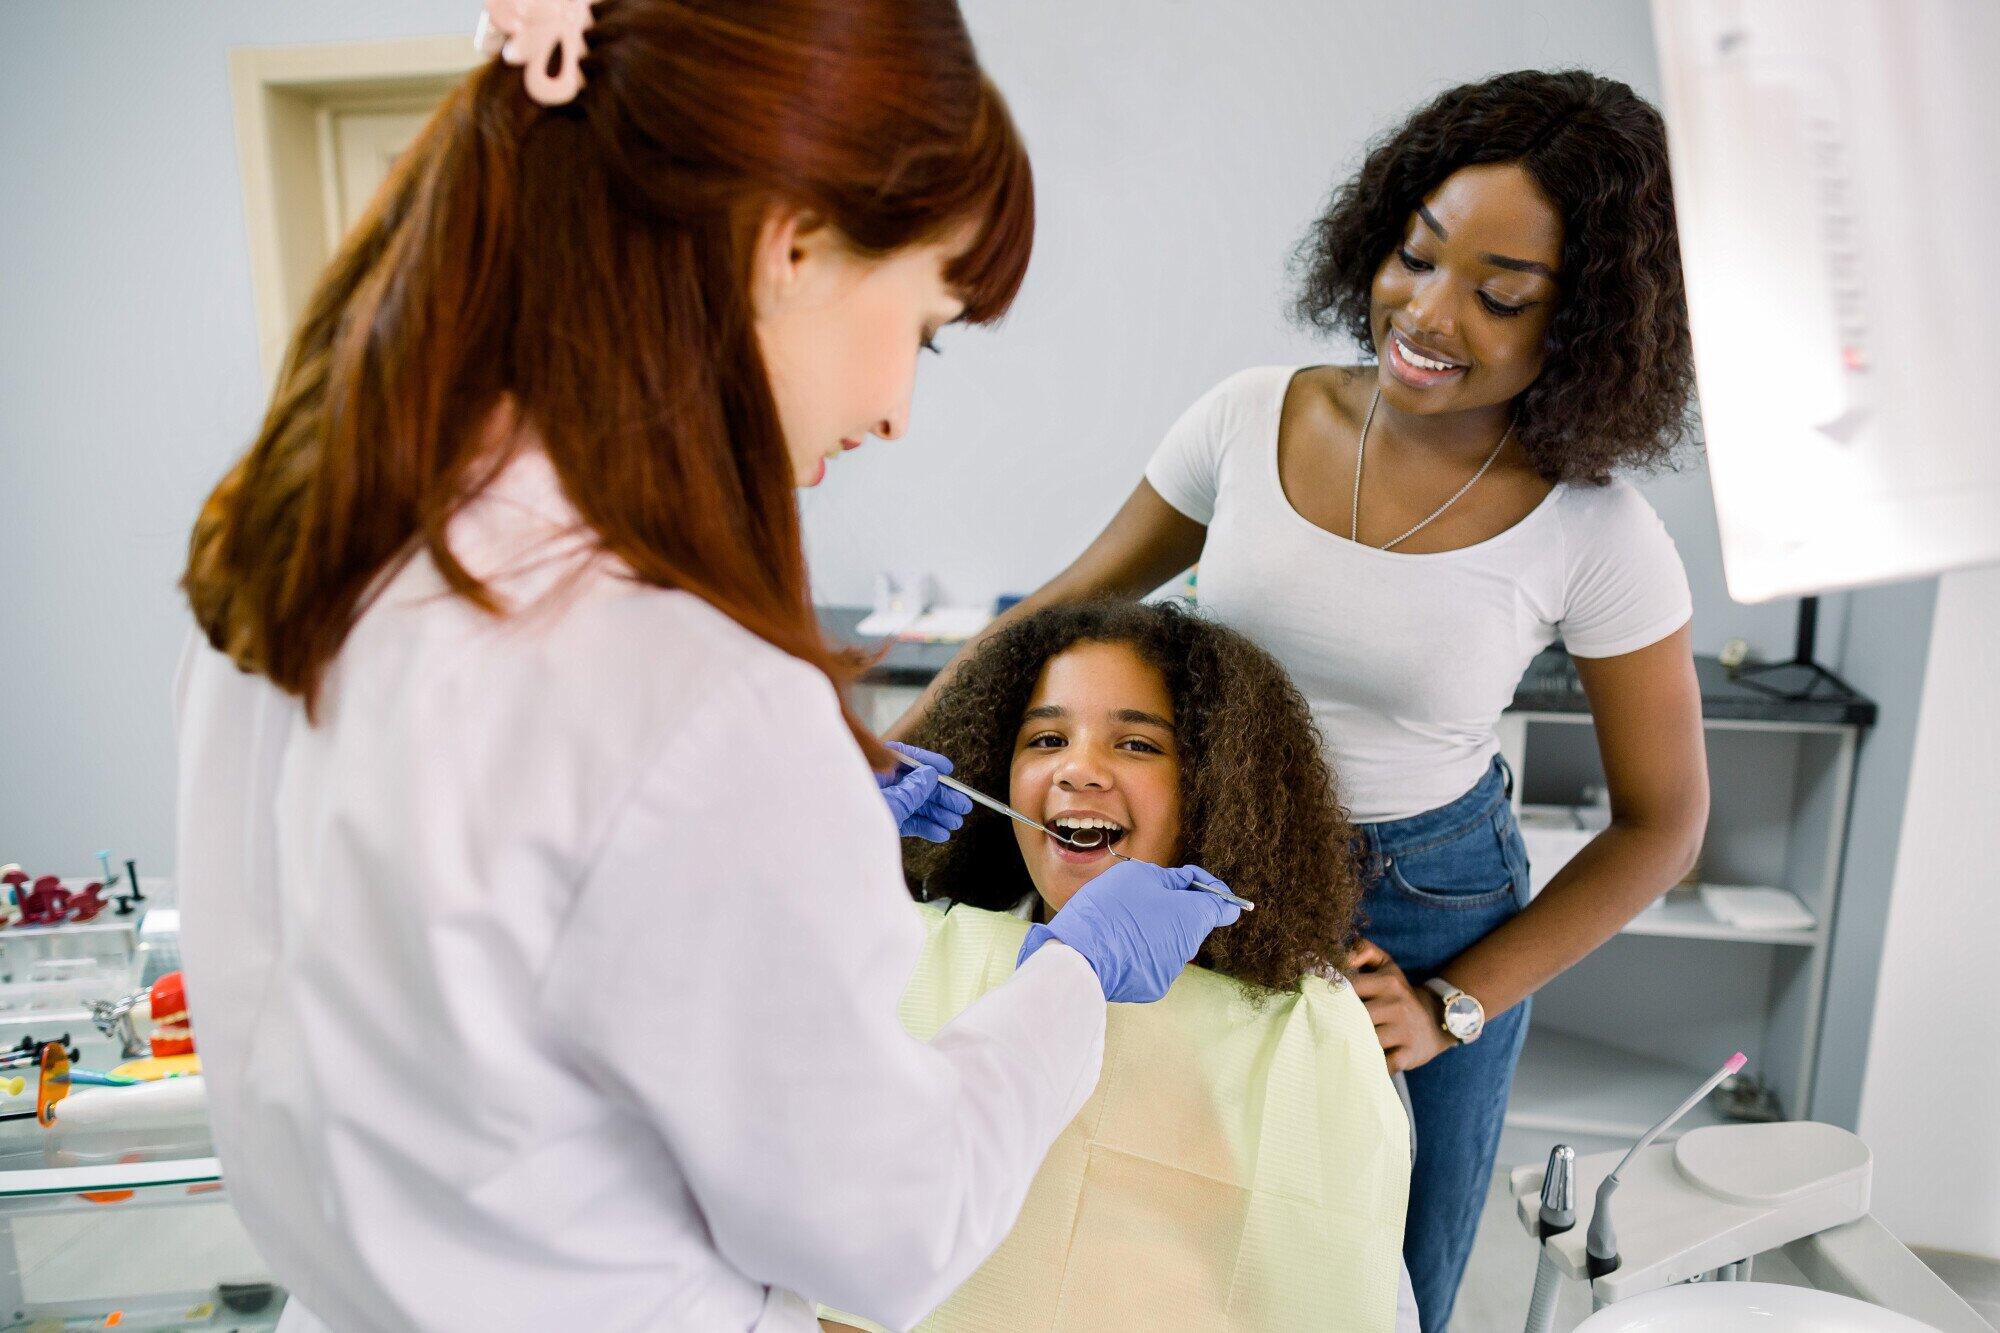 The Benefits of Having a Family Dentist for Your Whole Household